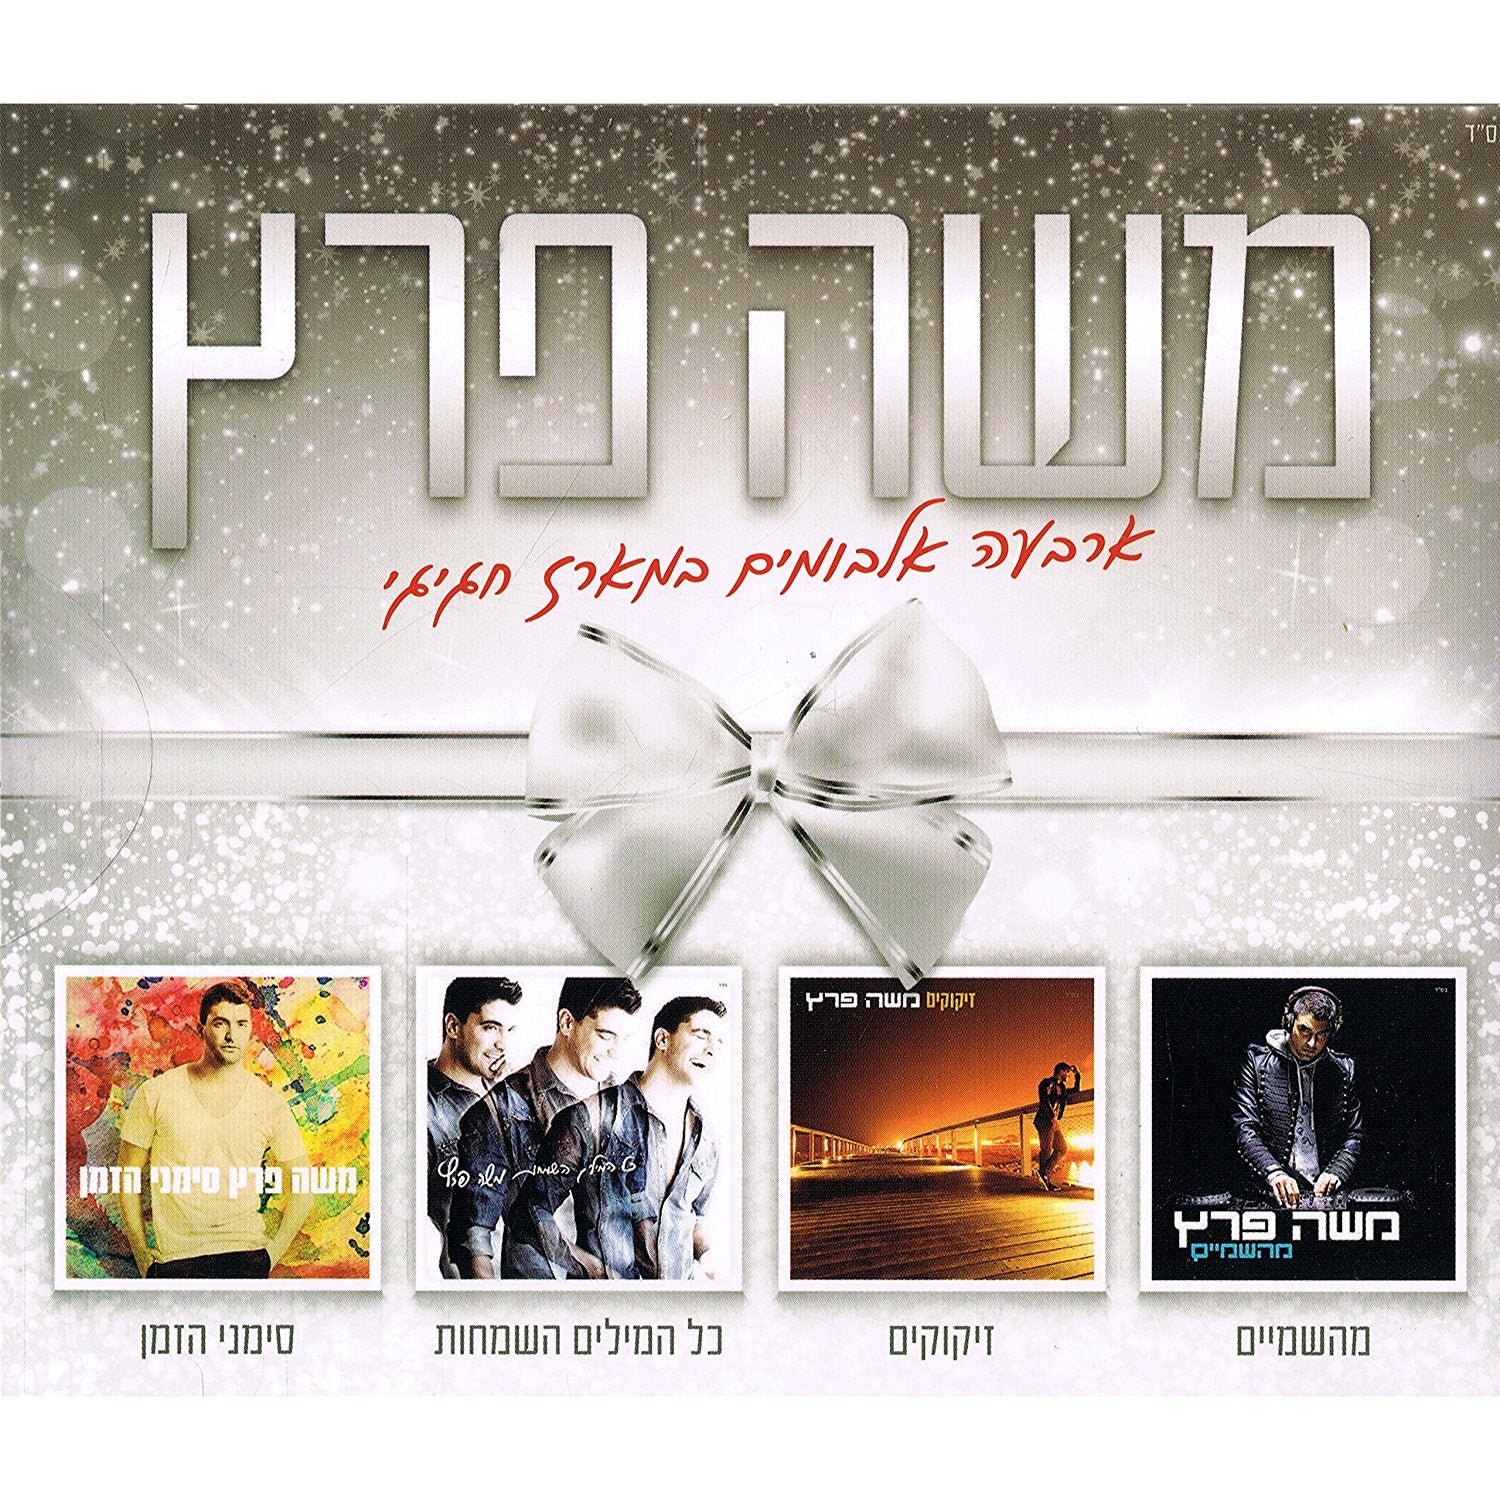 Moshe Peretz 4CD's Set - The Holidays Package